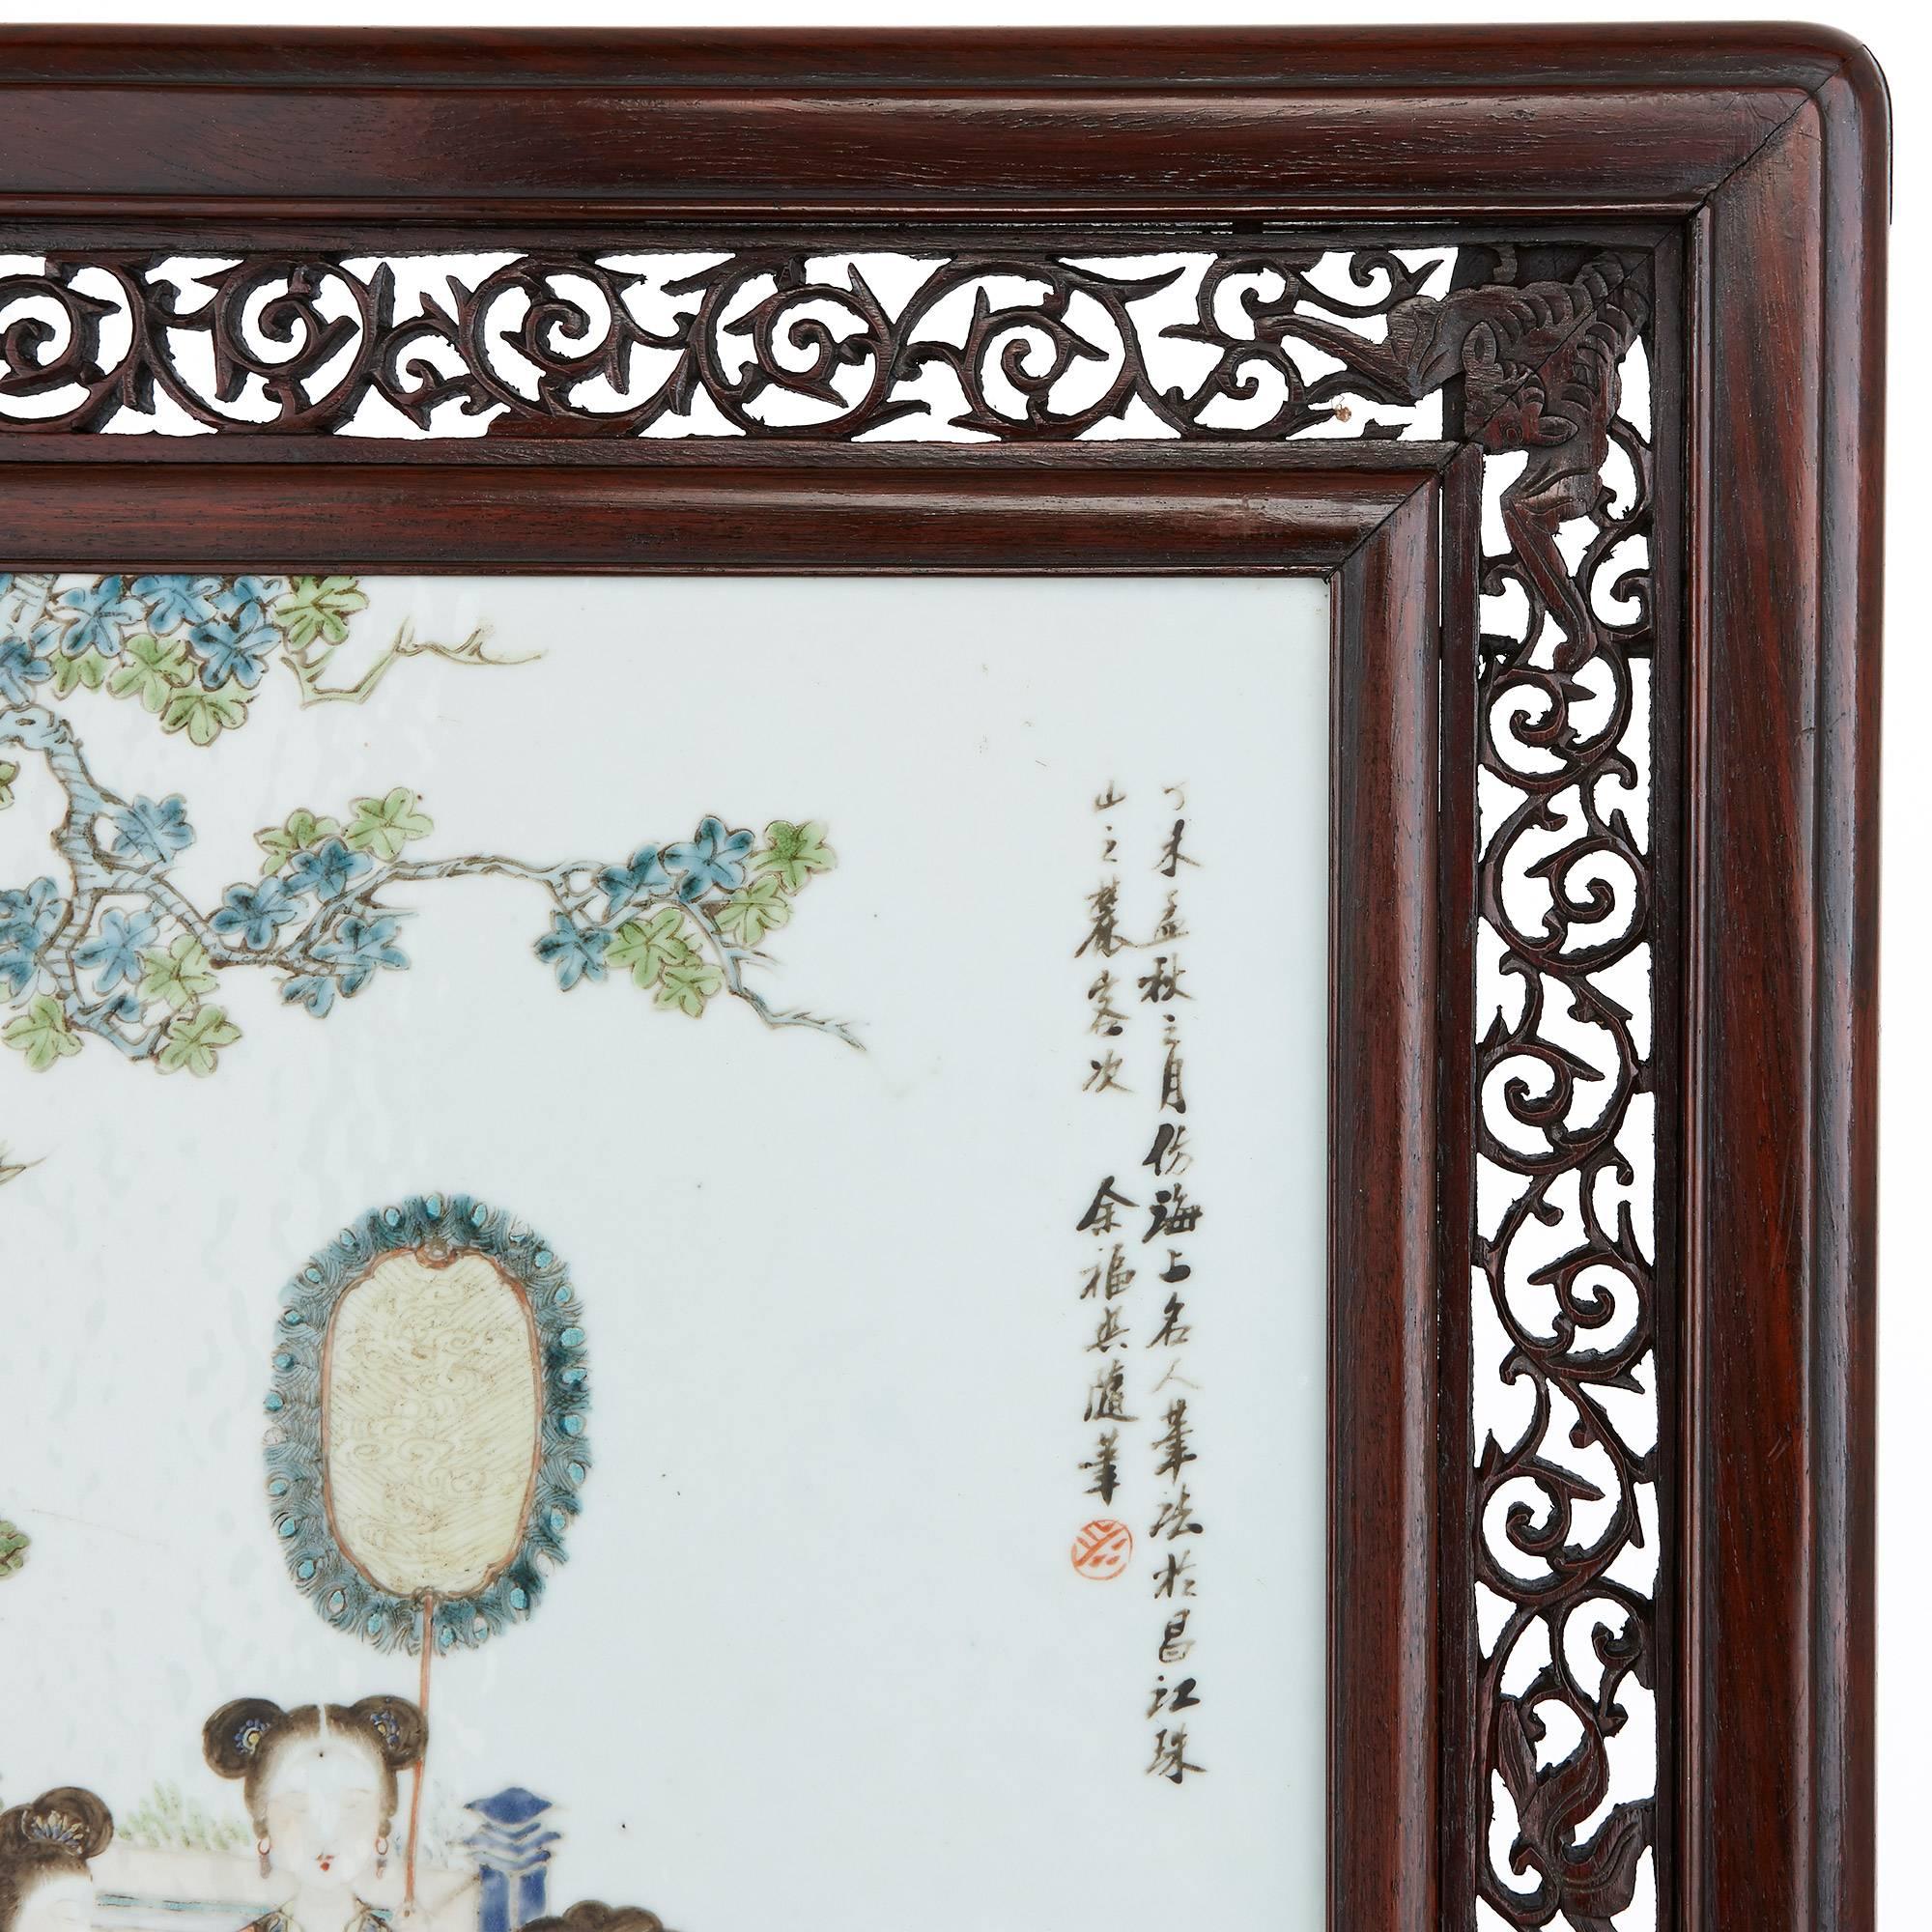 Hand-Carved Antique Chinese Rosewood Screen with Painted Porcelain Plaque